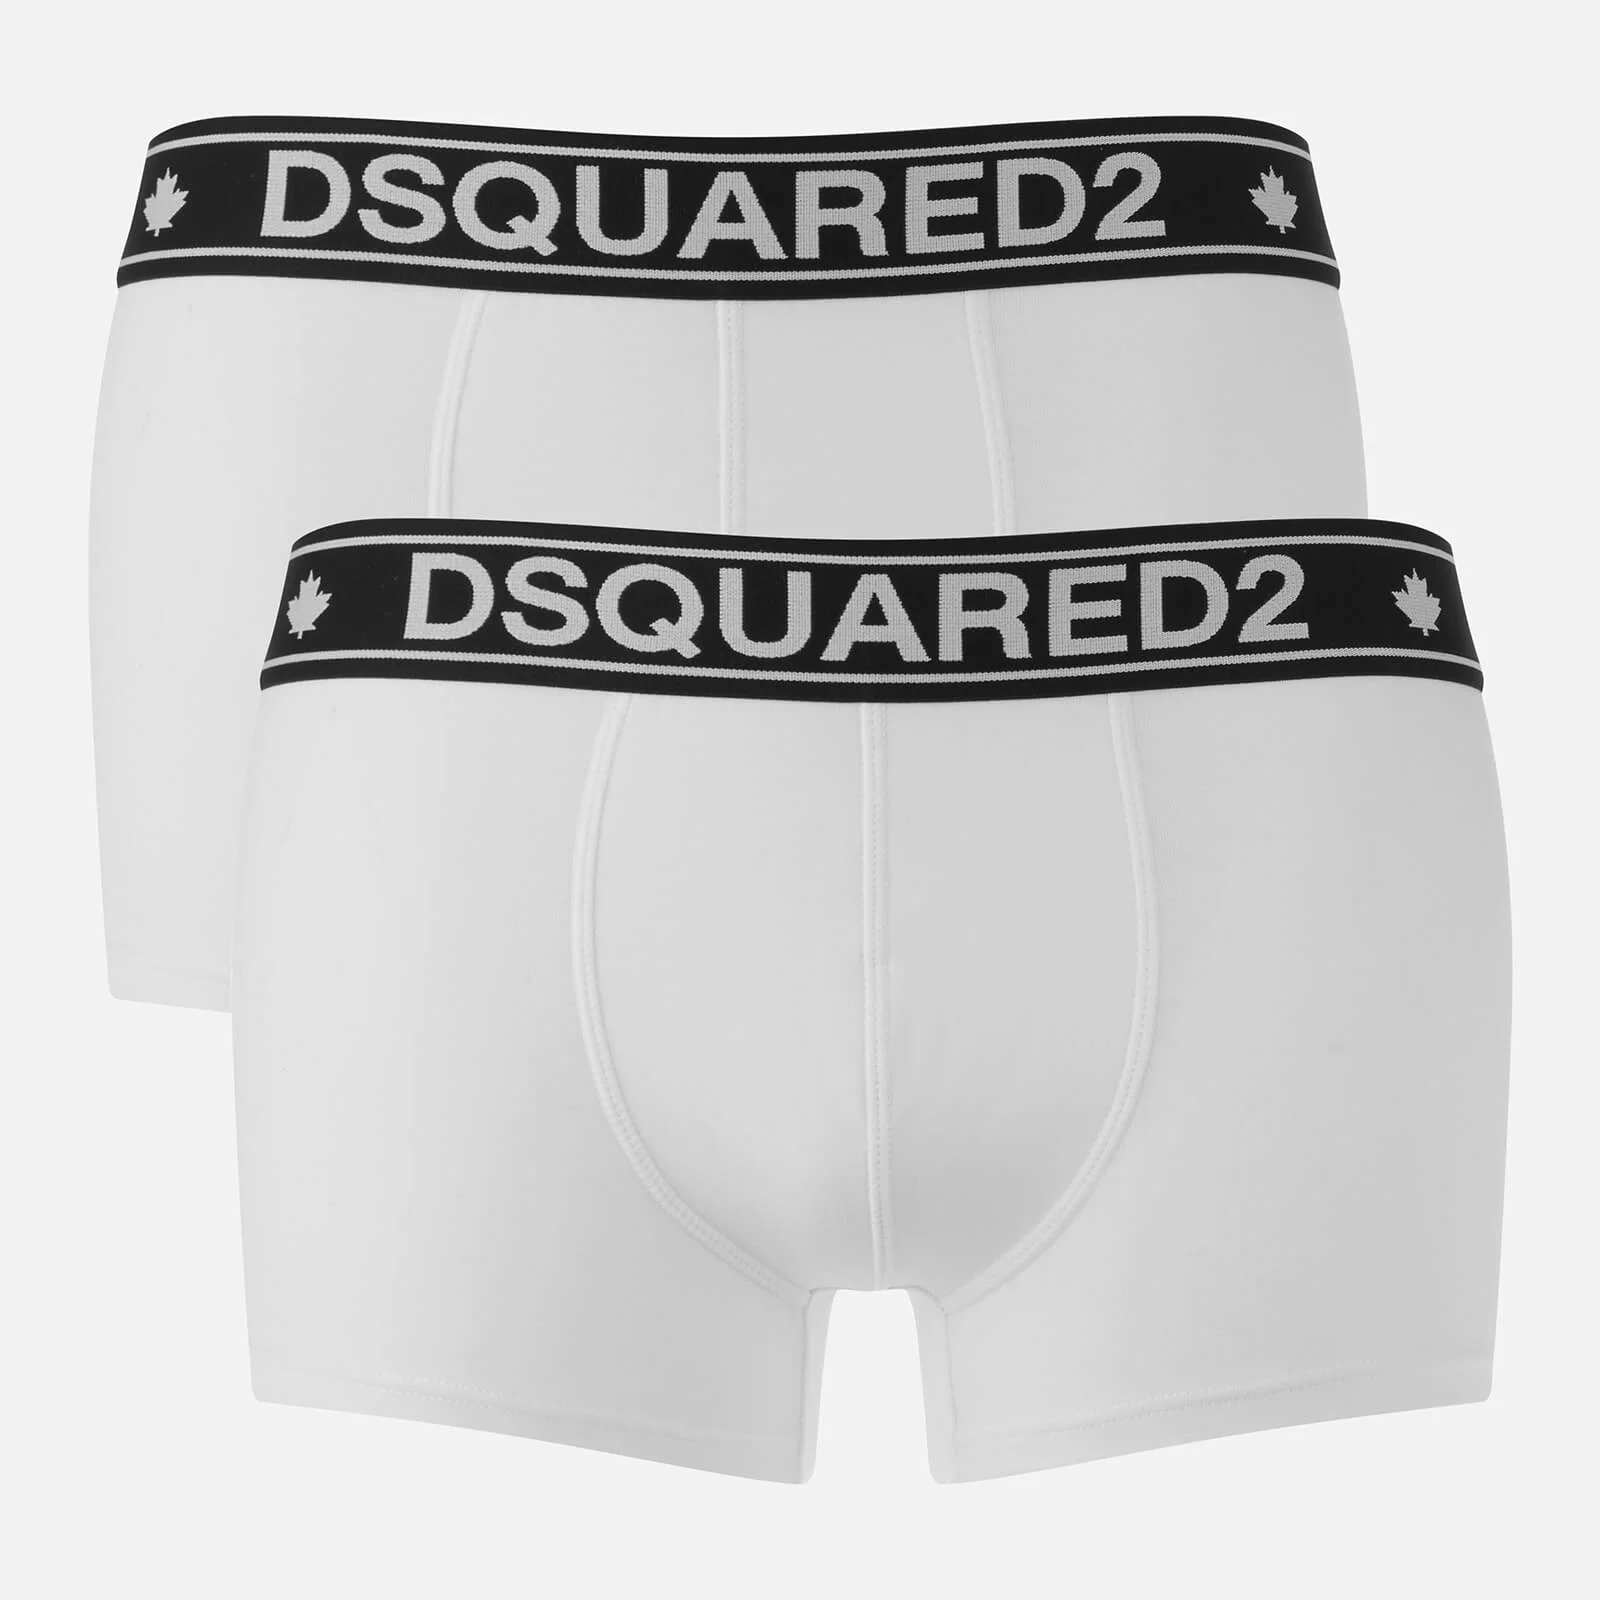 Dsquared2 Men's Twin Pack Trunk Boxers - White Image 1